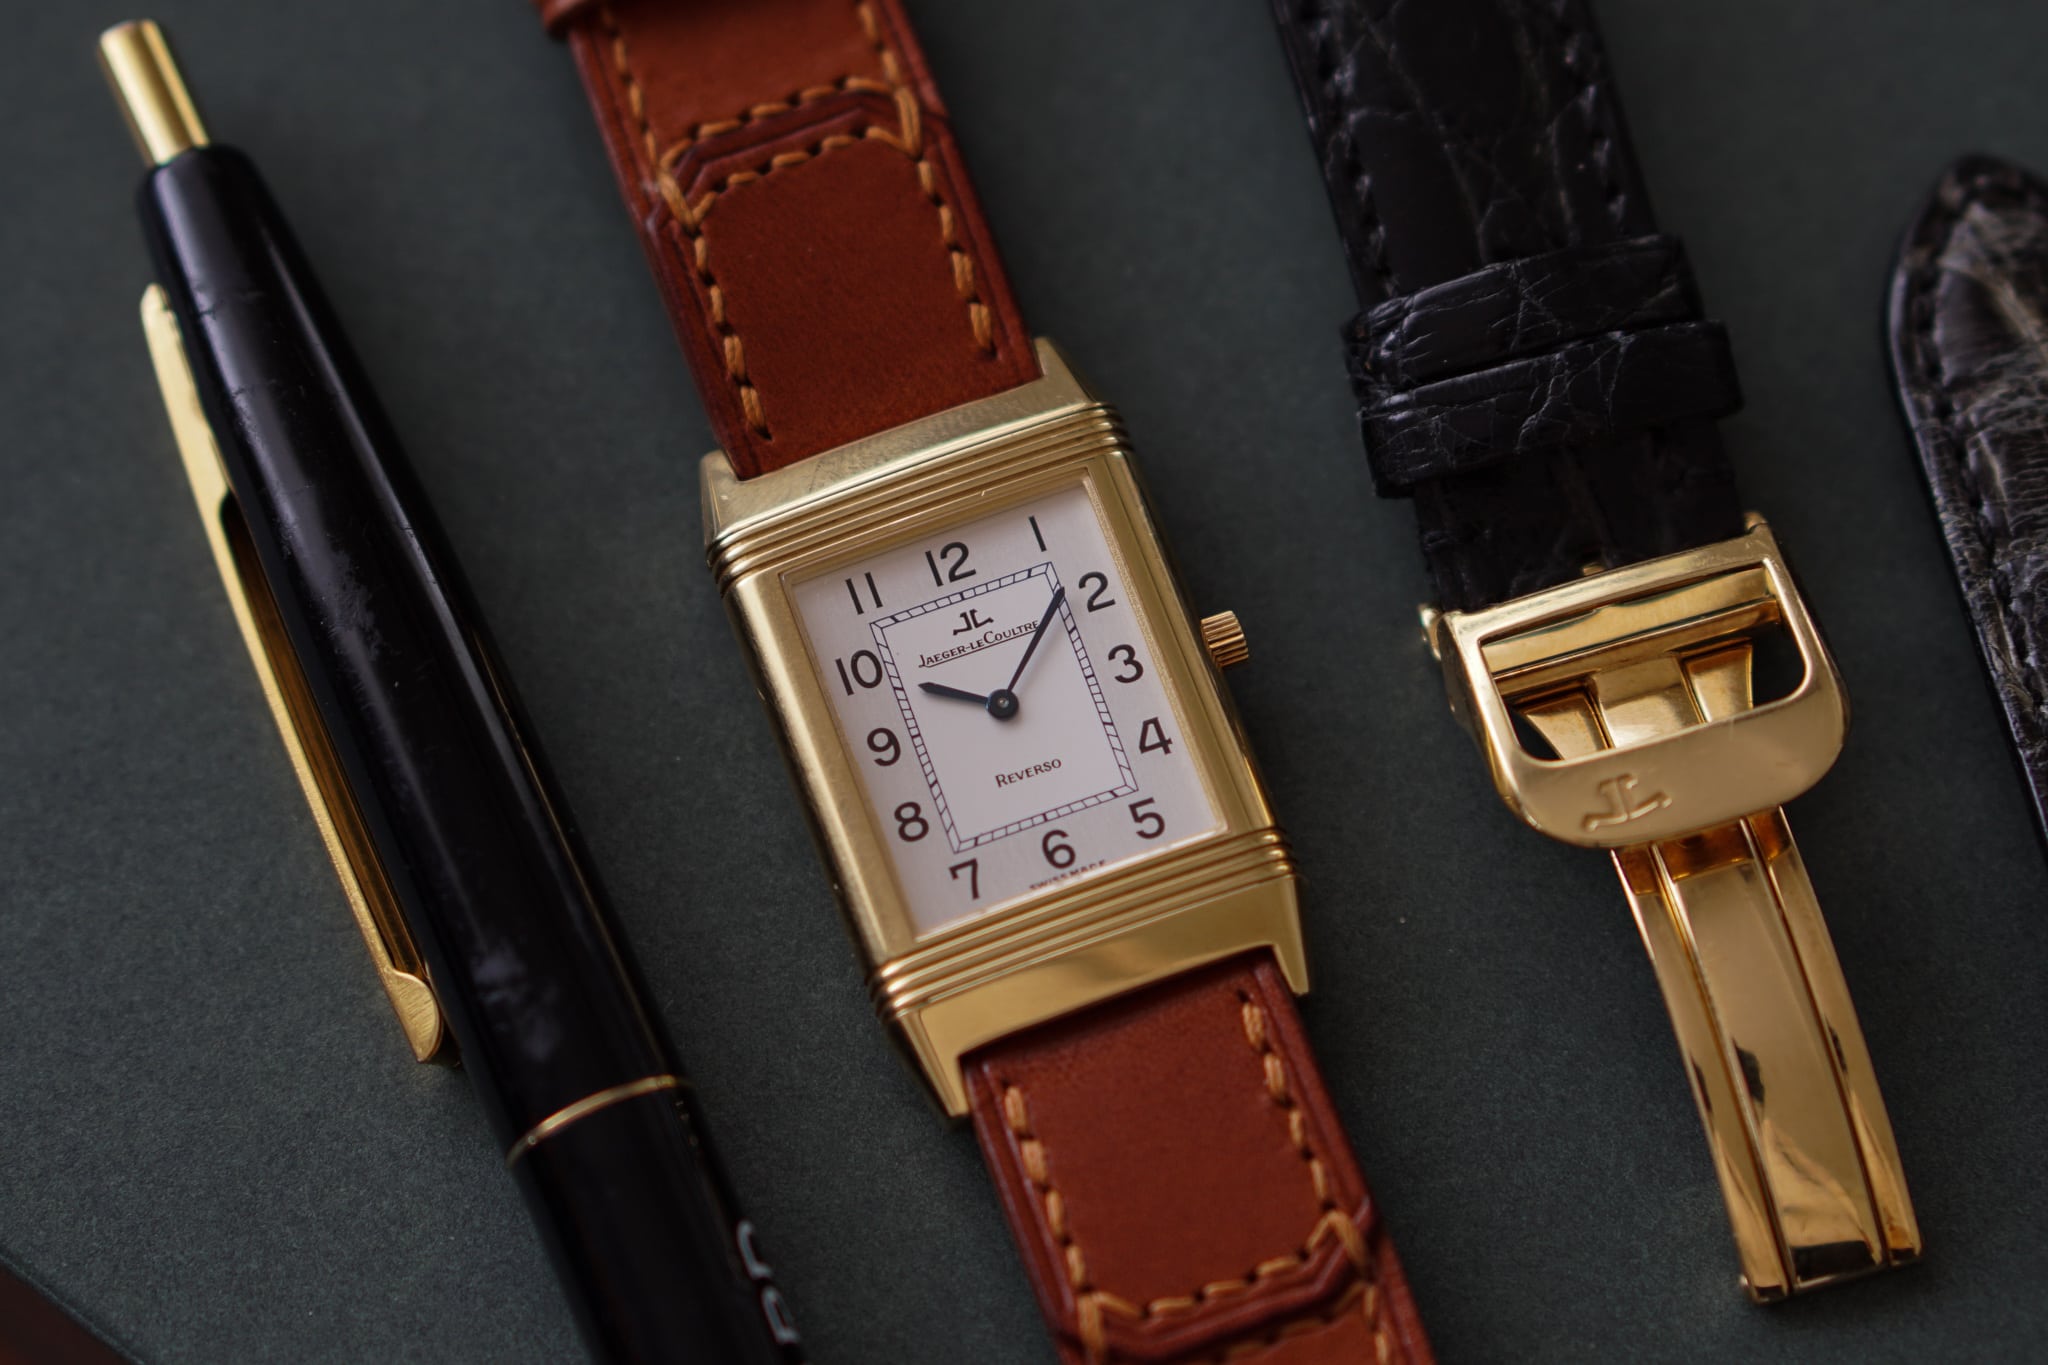 A Complete Guide to the JLC Master Control Watch - The Watch Company